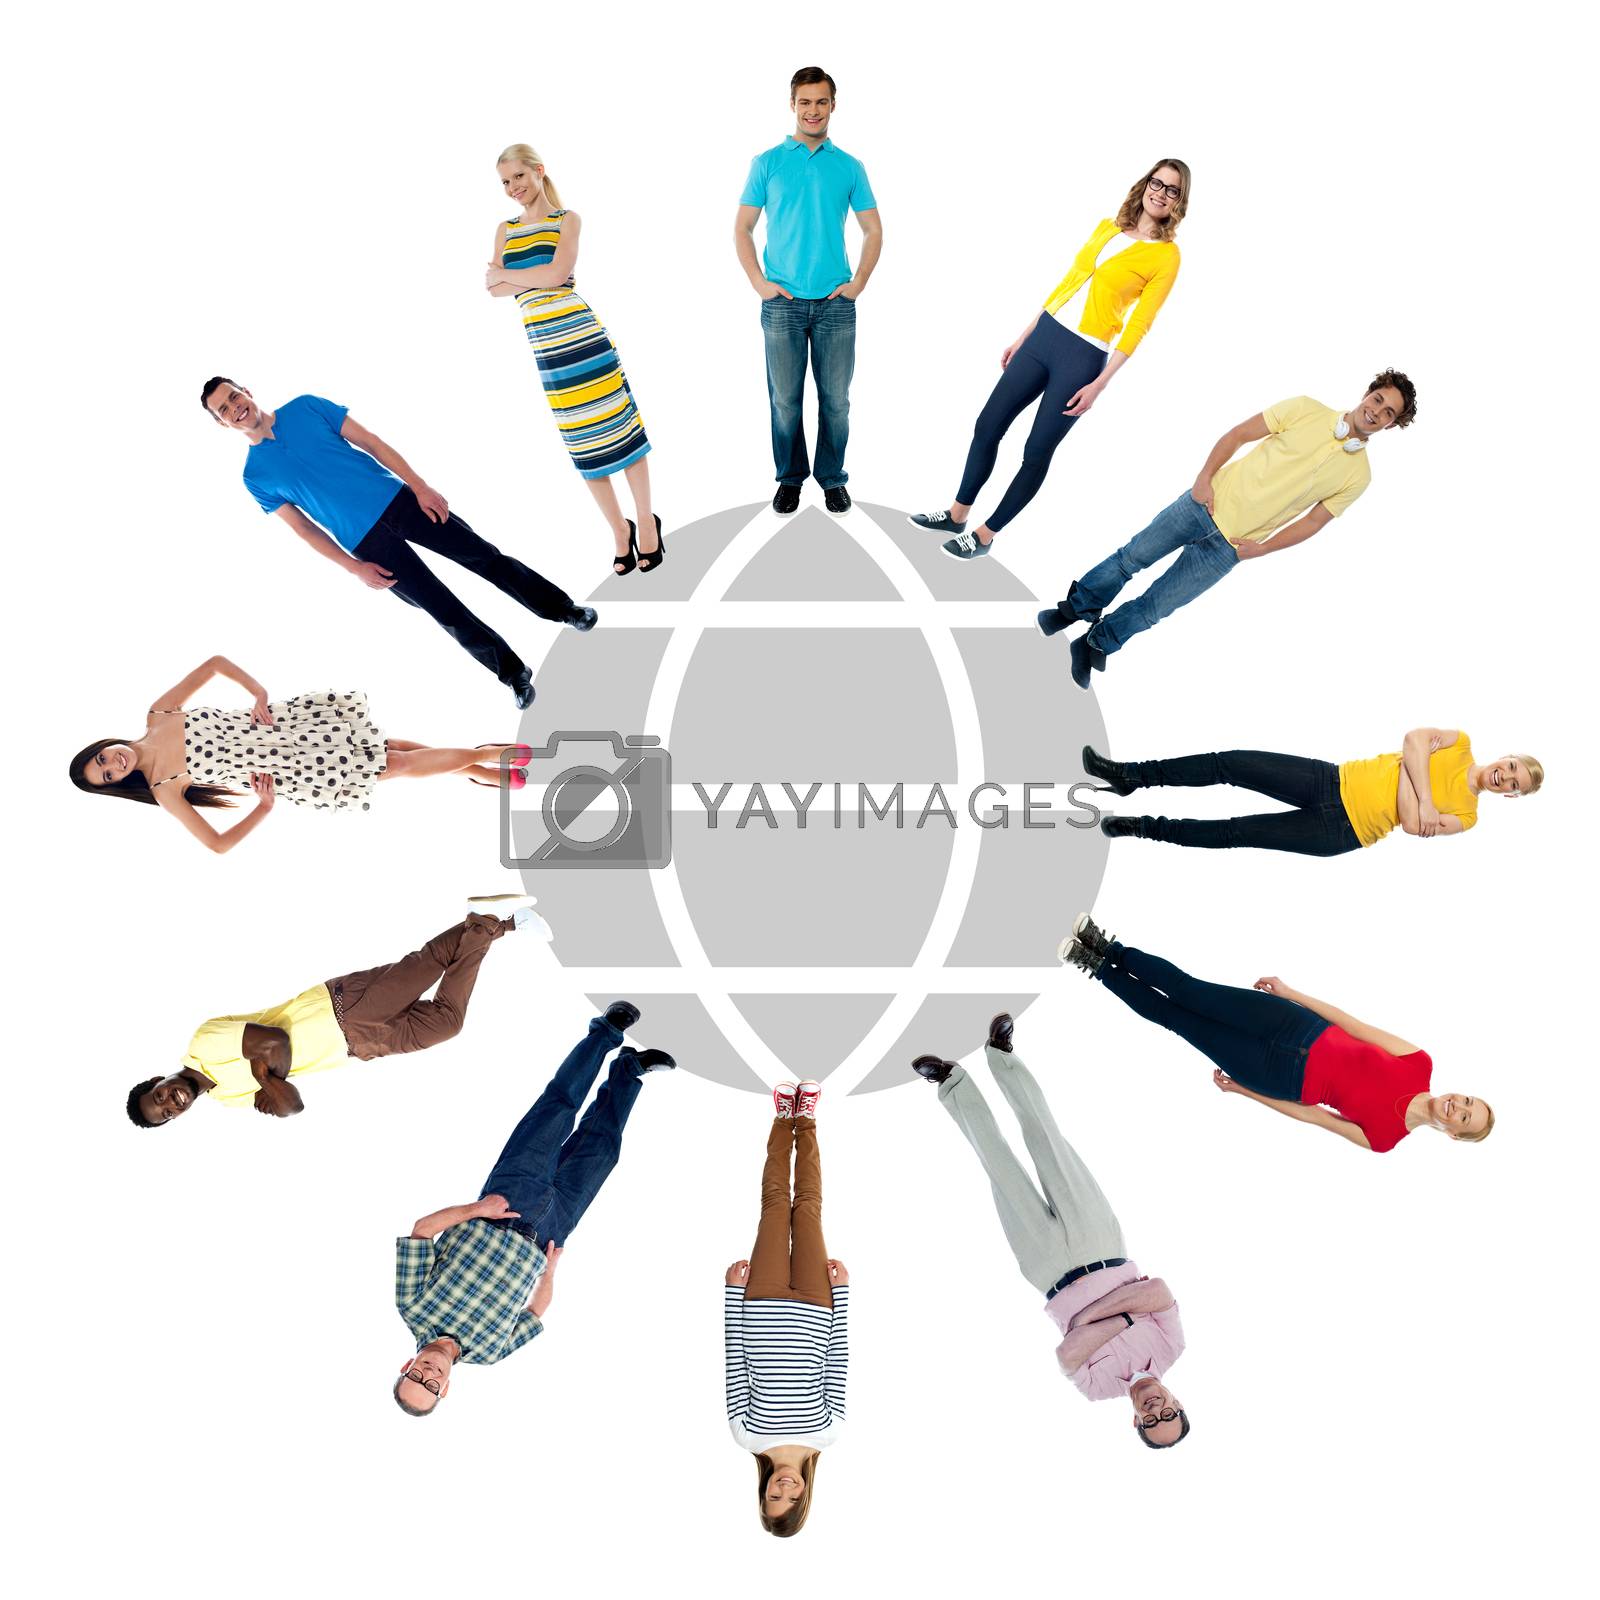 Royalty free image of Group of people standing in a circle by stockyimages